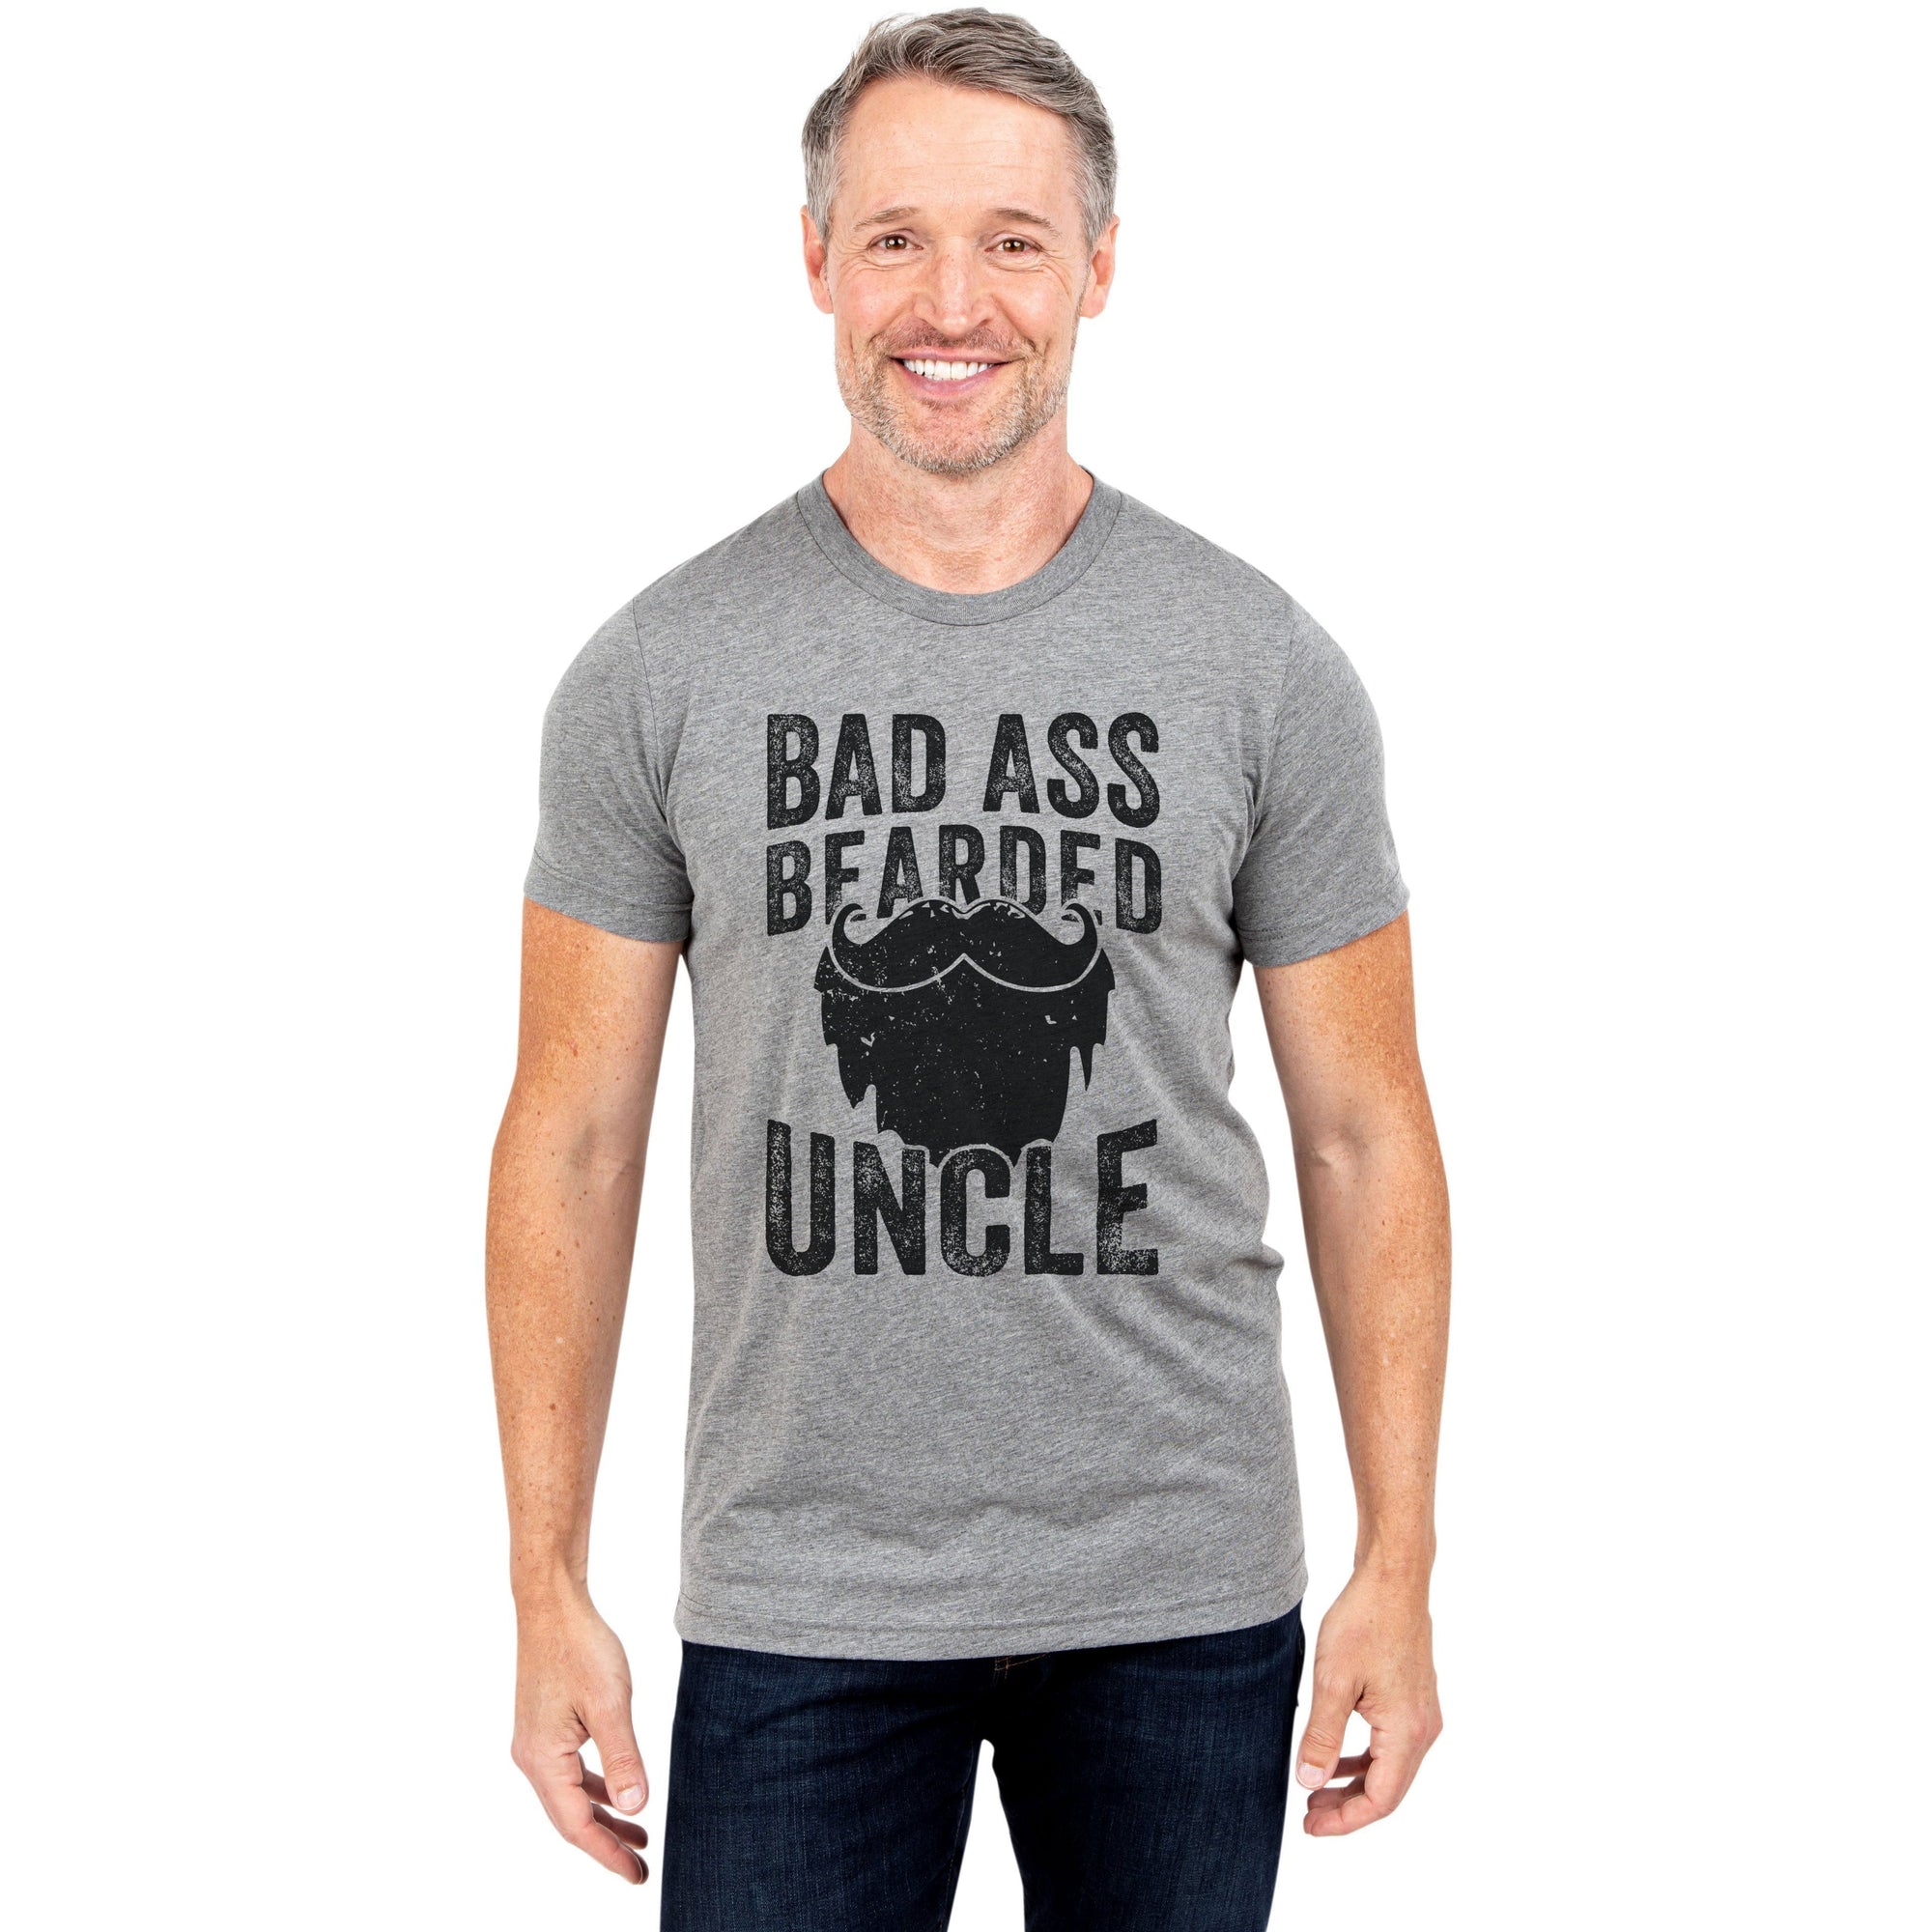 Bad Ass Bearded Uncle - Stories You Can Wear